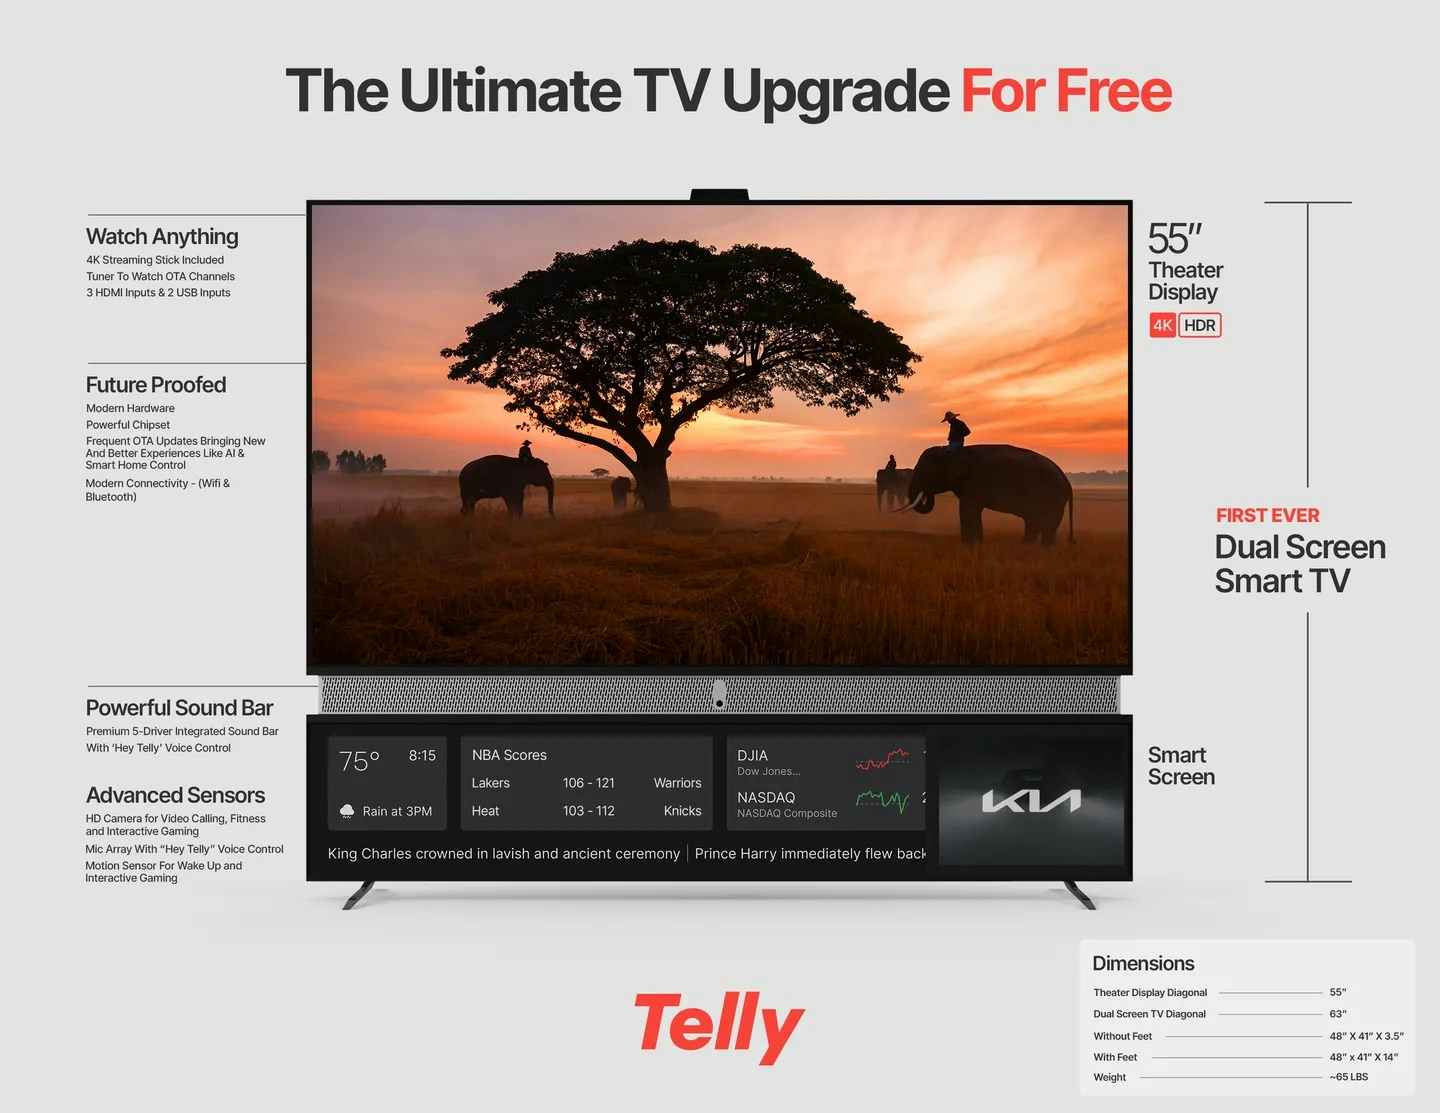 A diagram showing the various features of the free Telly TV